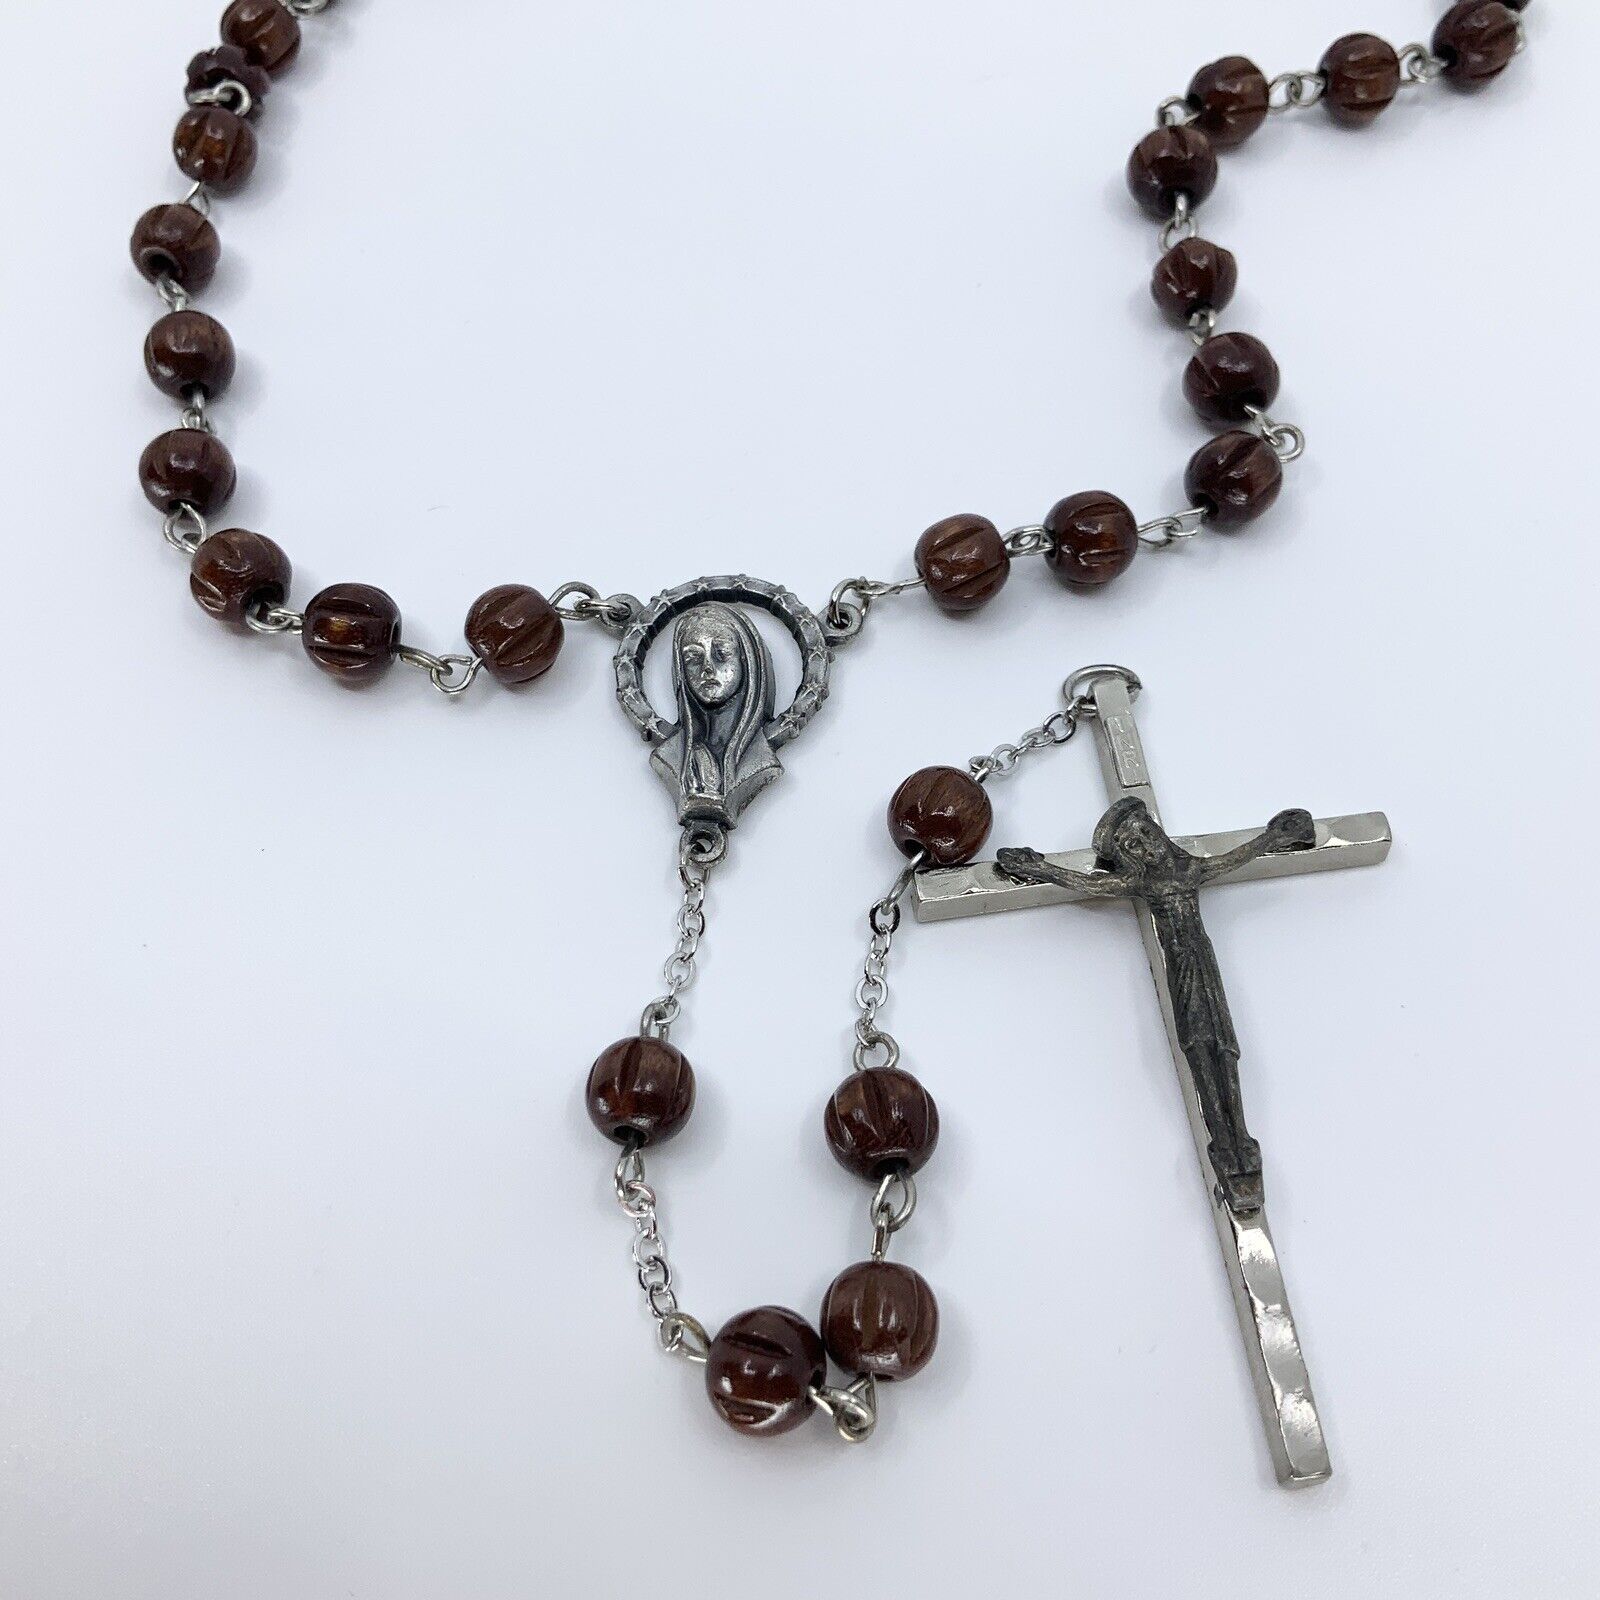 Vintage Inri Italy Signed Silver Tone Crucifix Madonna Carved Wood Bead Rosary